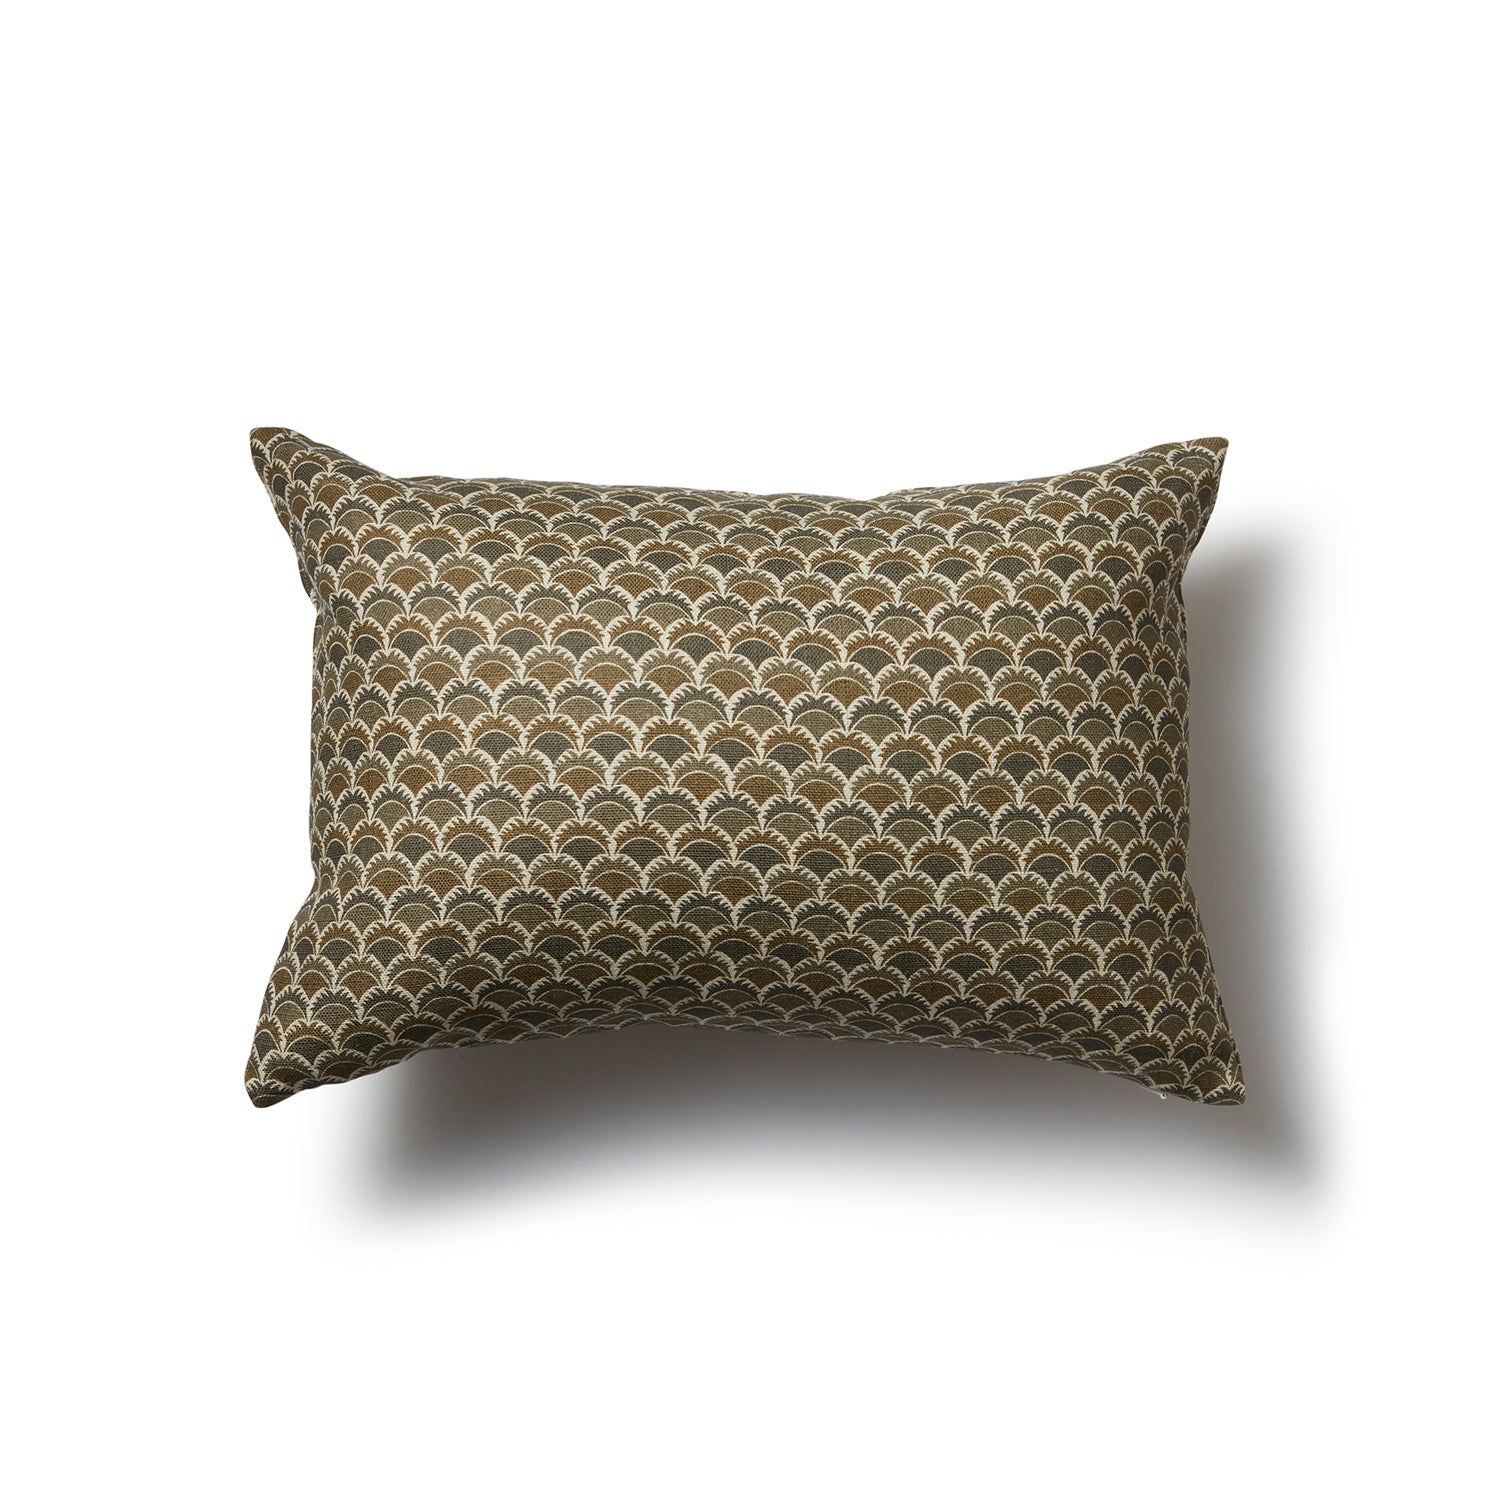 Rectangular throw pillow with a repeating Japanese-inspired scalloped pattern in shades of bronze, brown and cream.